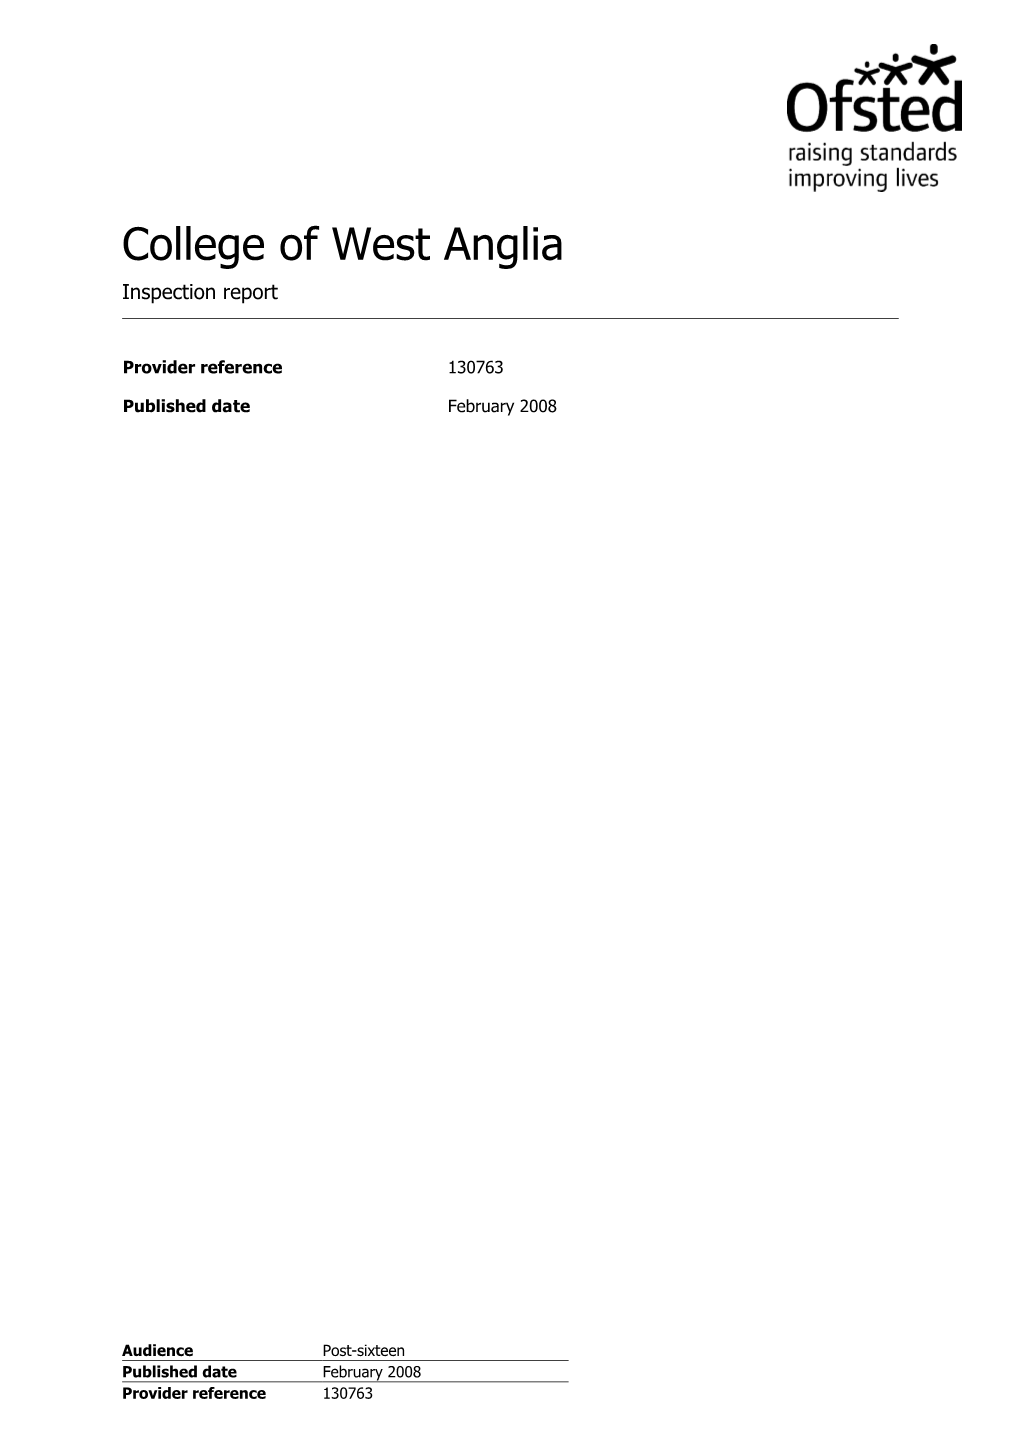 College of West Anglia Inspection Report